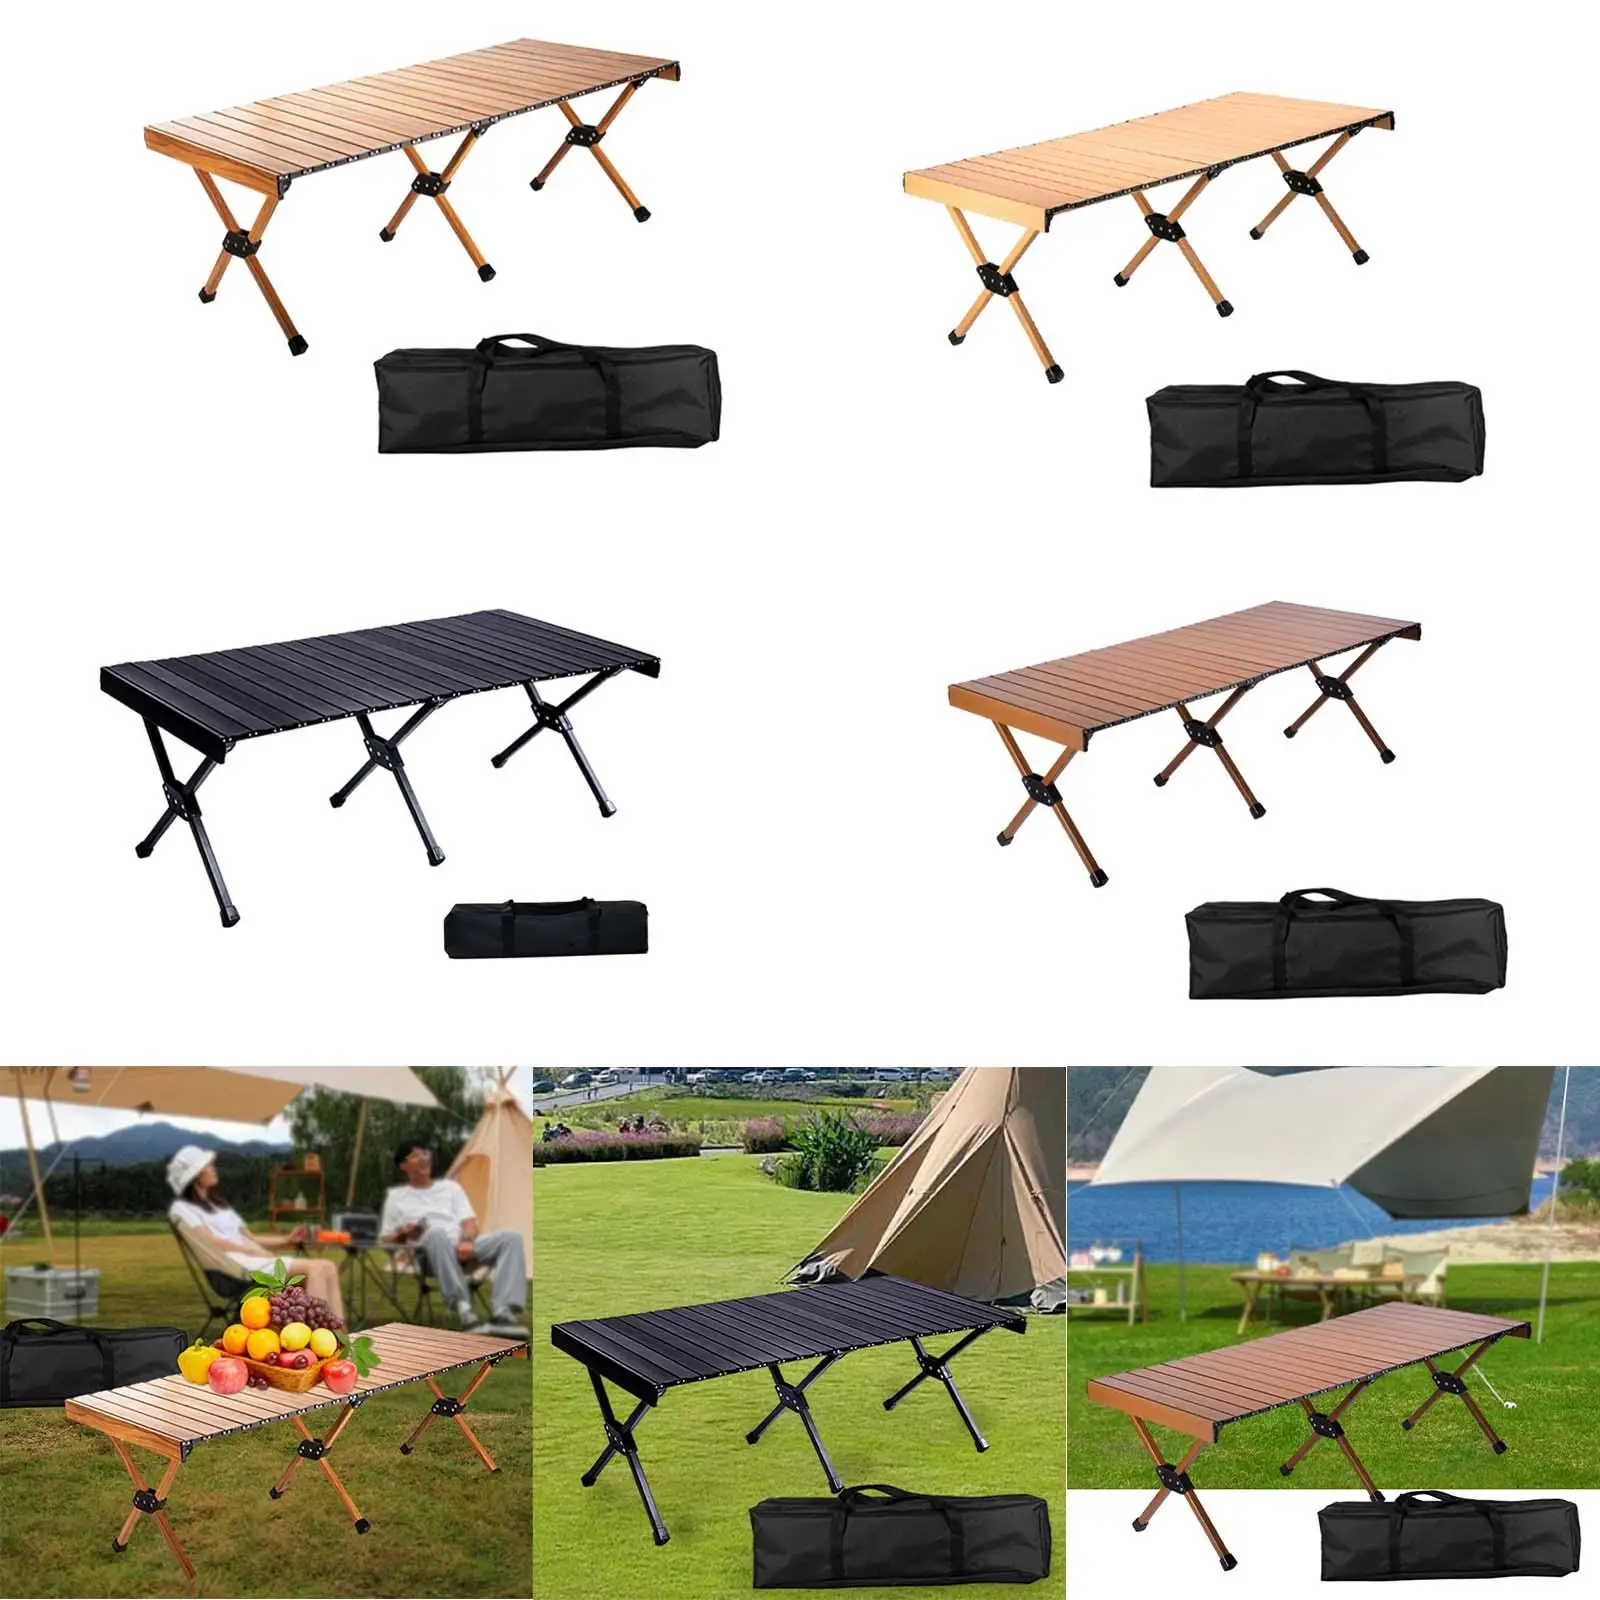 Camping Folding Table Portable Easy to Carry Lightweight Foldable Picnic Table for Balcony Outdoor Indoor Hiking Kitchen Deck